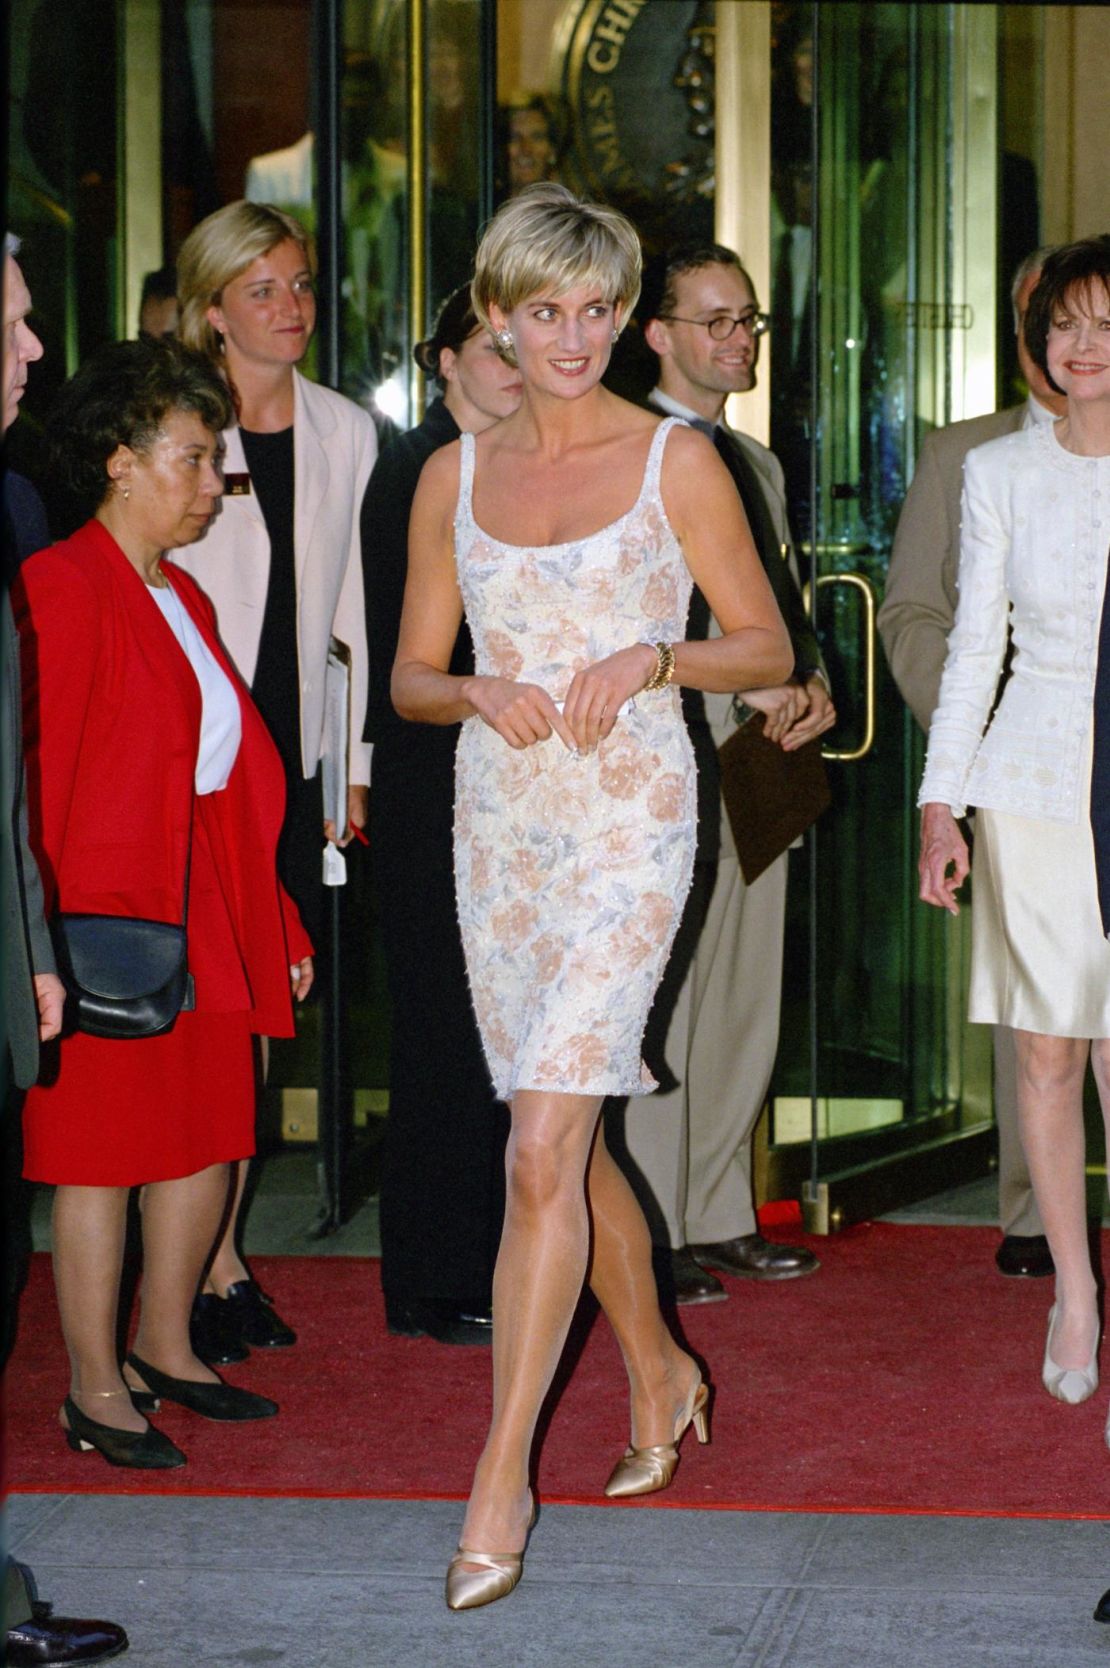 Wondering What's Back? It's The Iconic Princess Diana Lady Dior